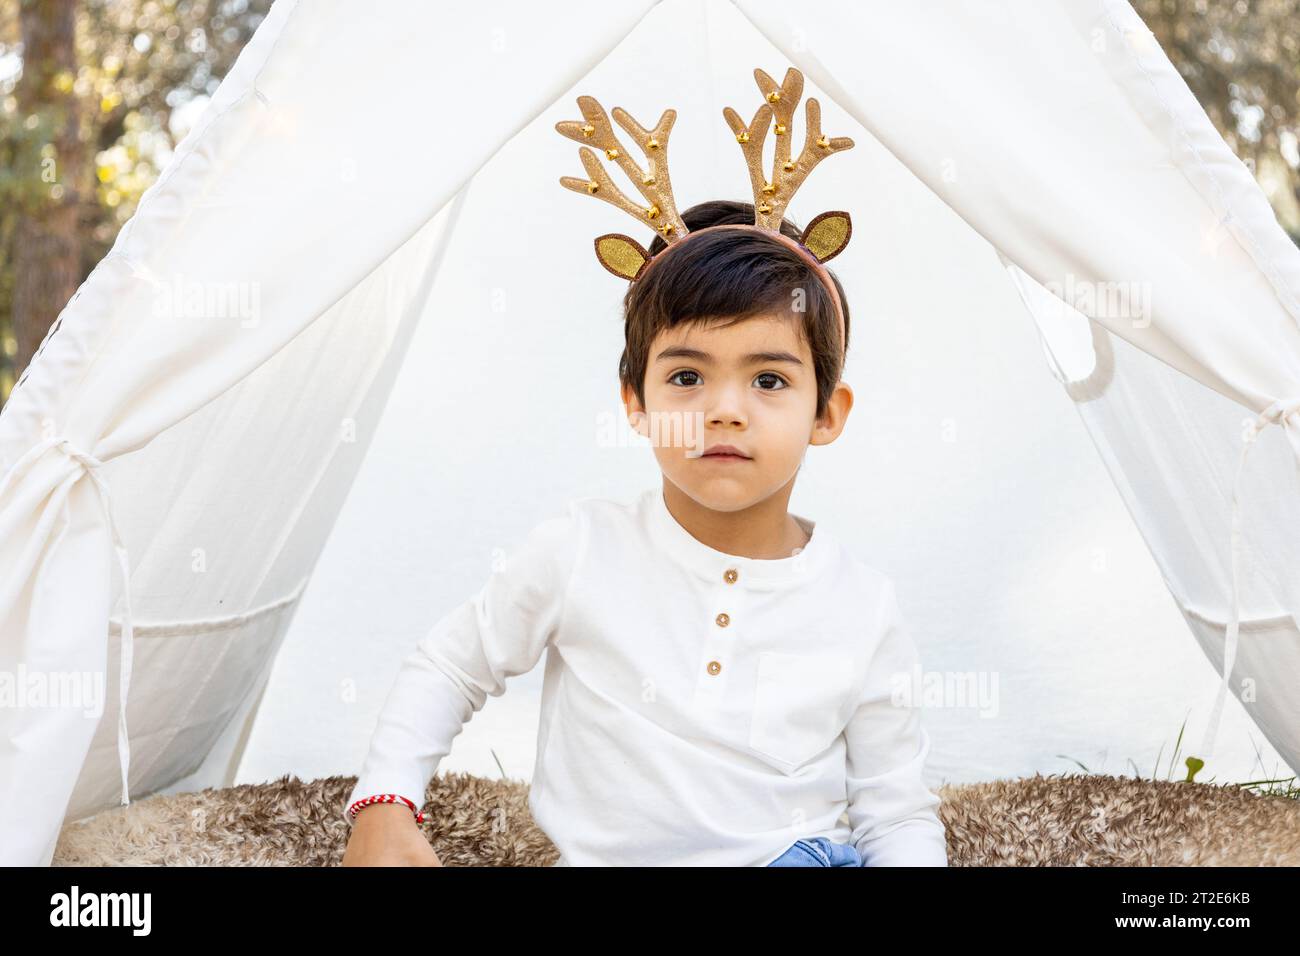 Smiling child boy playing with Christmas decoration in outdoor teepee tent with glitter reindeer antlers. Winter family photoshoot in the forest. Stock Photo